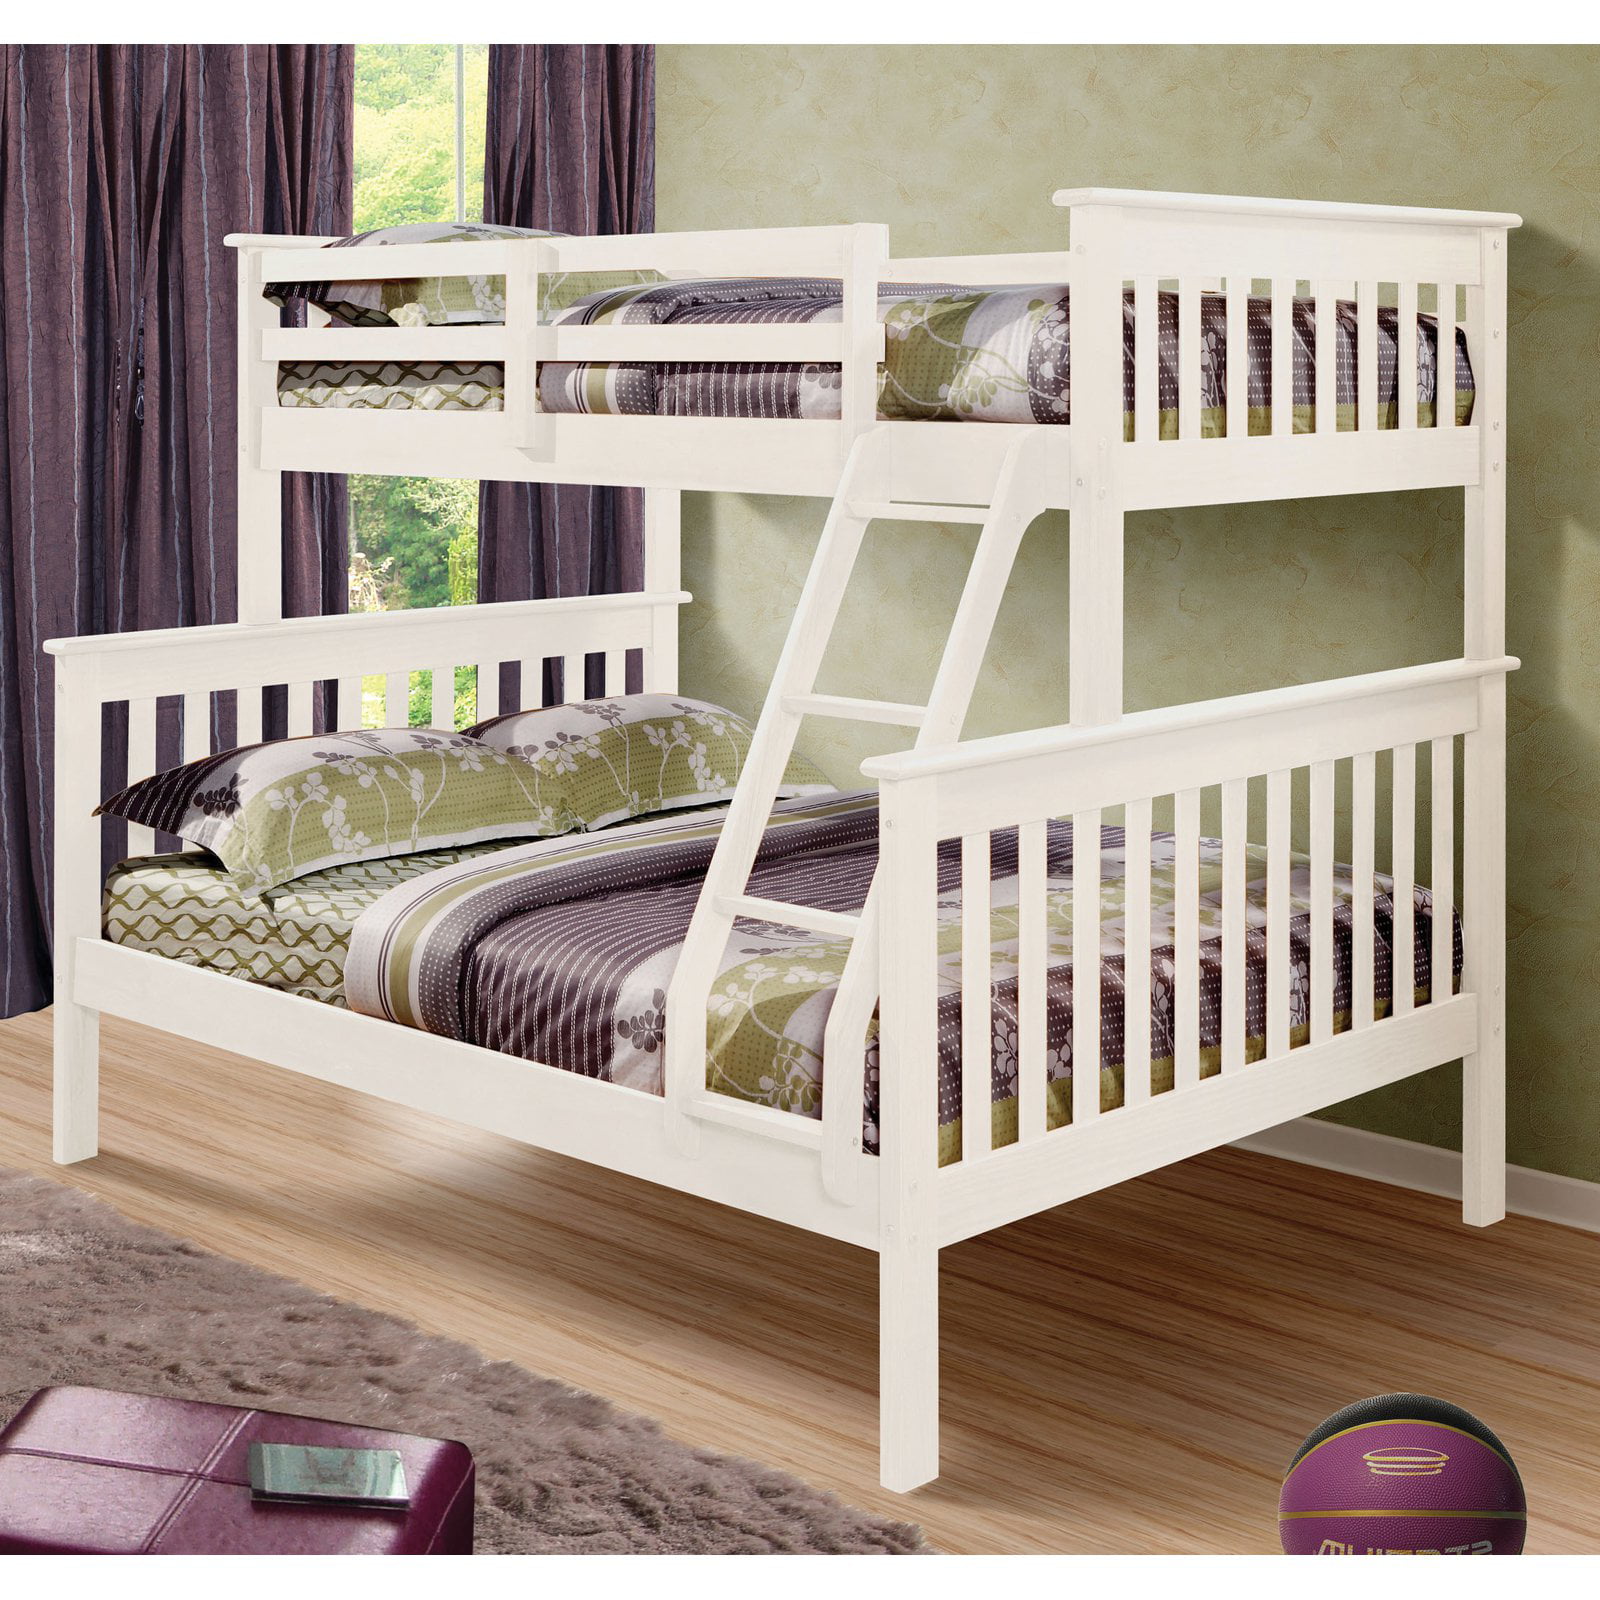 Details about   Modern Mission Bunk Beds with Storage 